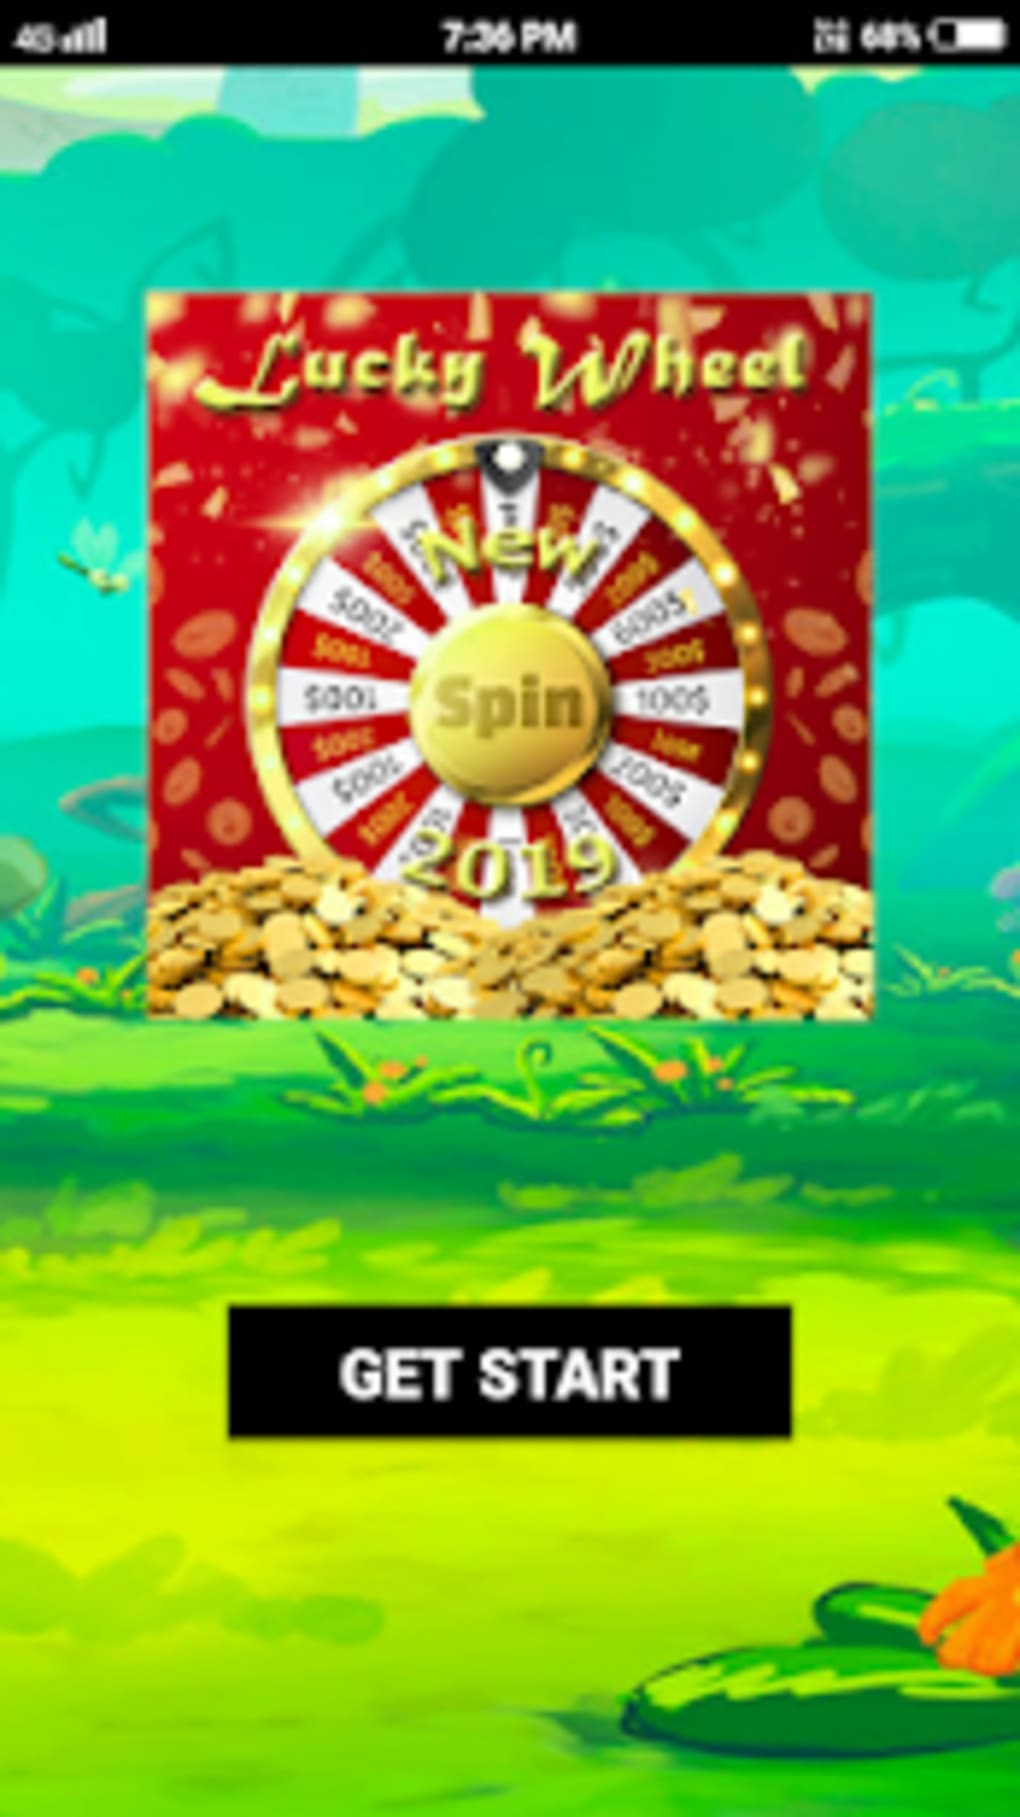 121 free spins win real money